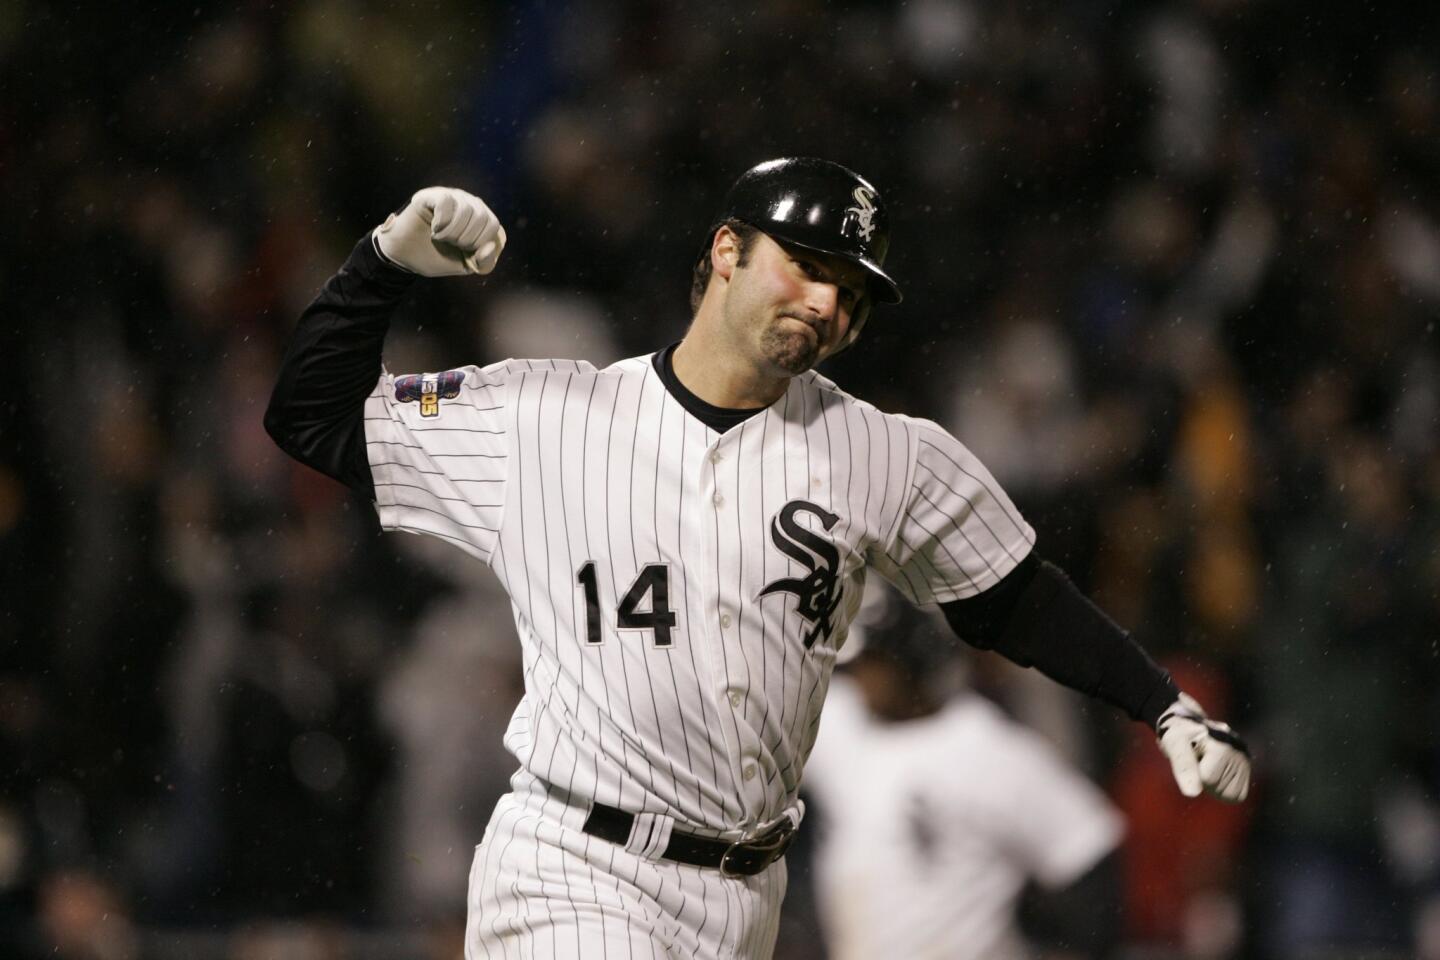 Scott Podsednik: White Sox players have not been held accountable